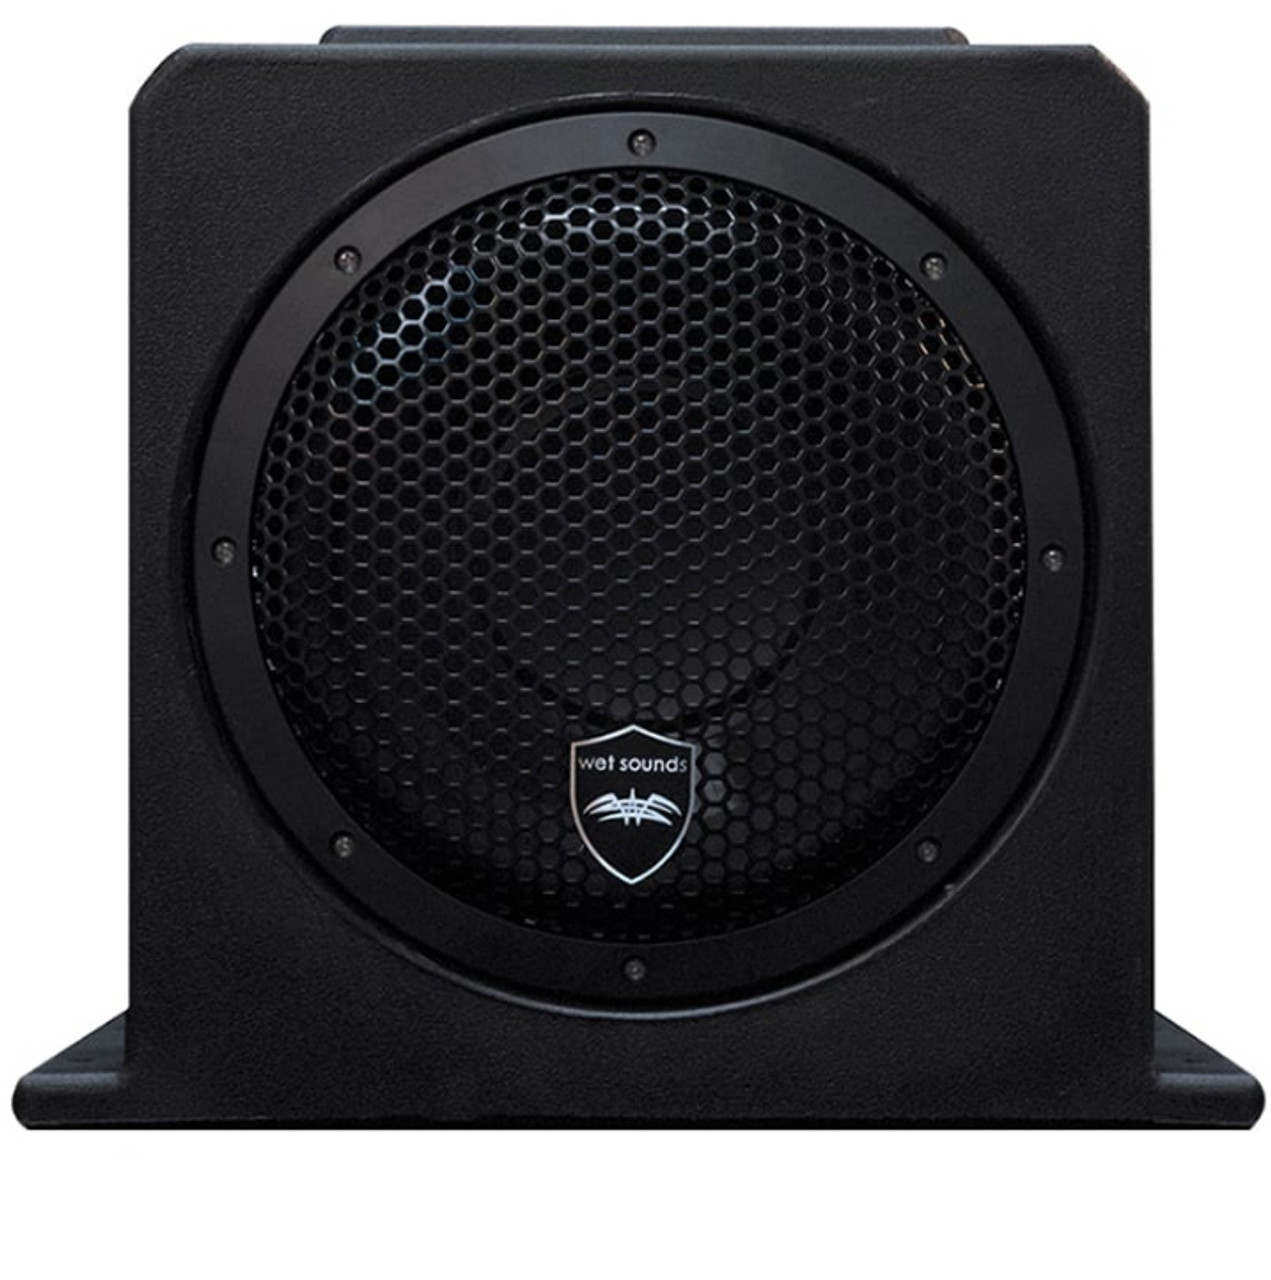 Wet Sounds Stealth AS-10 500 watts Active Subwoofer Enclosure - Open - Creative Audio